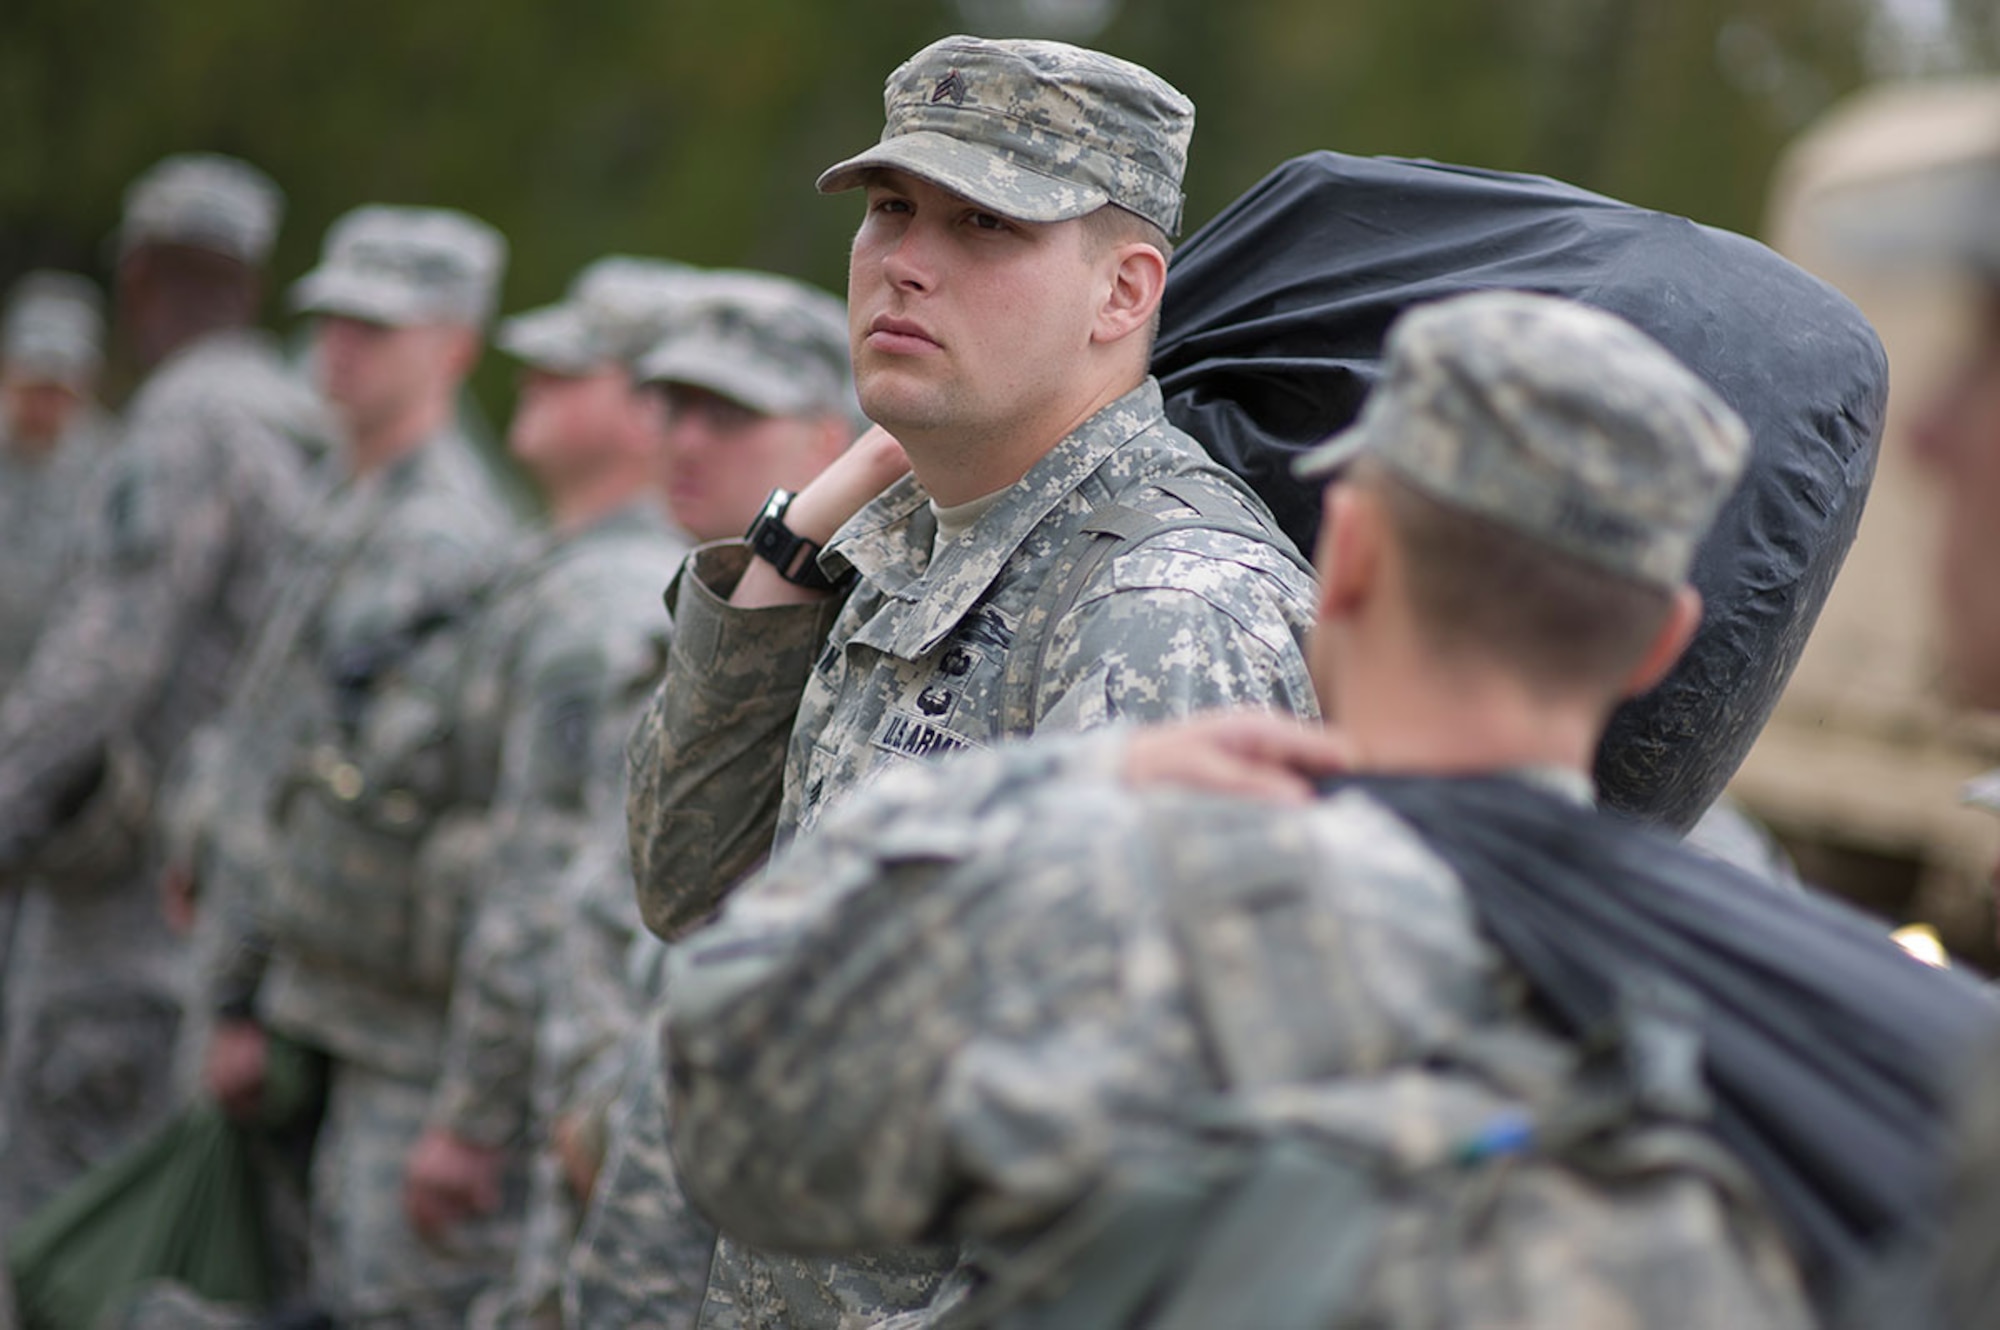 Army Sgt. Christopher Cureton, a native of Las Vegas, assigned to Deleware Company, 1st Battalion (Airborne), 501st Infantry Regiment, 4th Infantry Brigade Combat Team (Airborne), 25th Infantry Division, U.S. Army Alaska, stands in a formation awaiting instructions from cadre during Expert Infantryman Badge qualification on Joint Base Elmendorf-Richardson, Tuesday, Sept. 9, 2014. The Expert Infantryman Badge was approved by the Secretary of War on October 7, 1943, and is currently awarded to U.S. Army personnel who hold infantry or special forces military occupational specialties and successfully pass the rigors of the course. (U.S. Air Force photo/Justin Connaher)